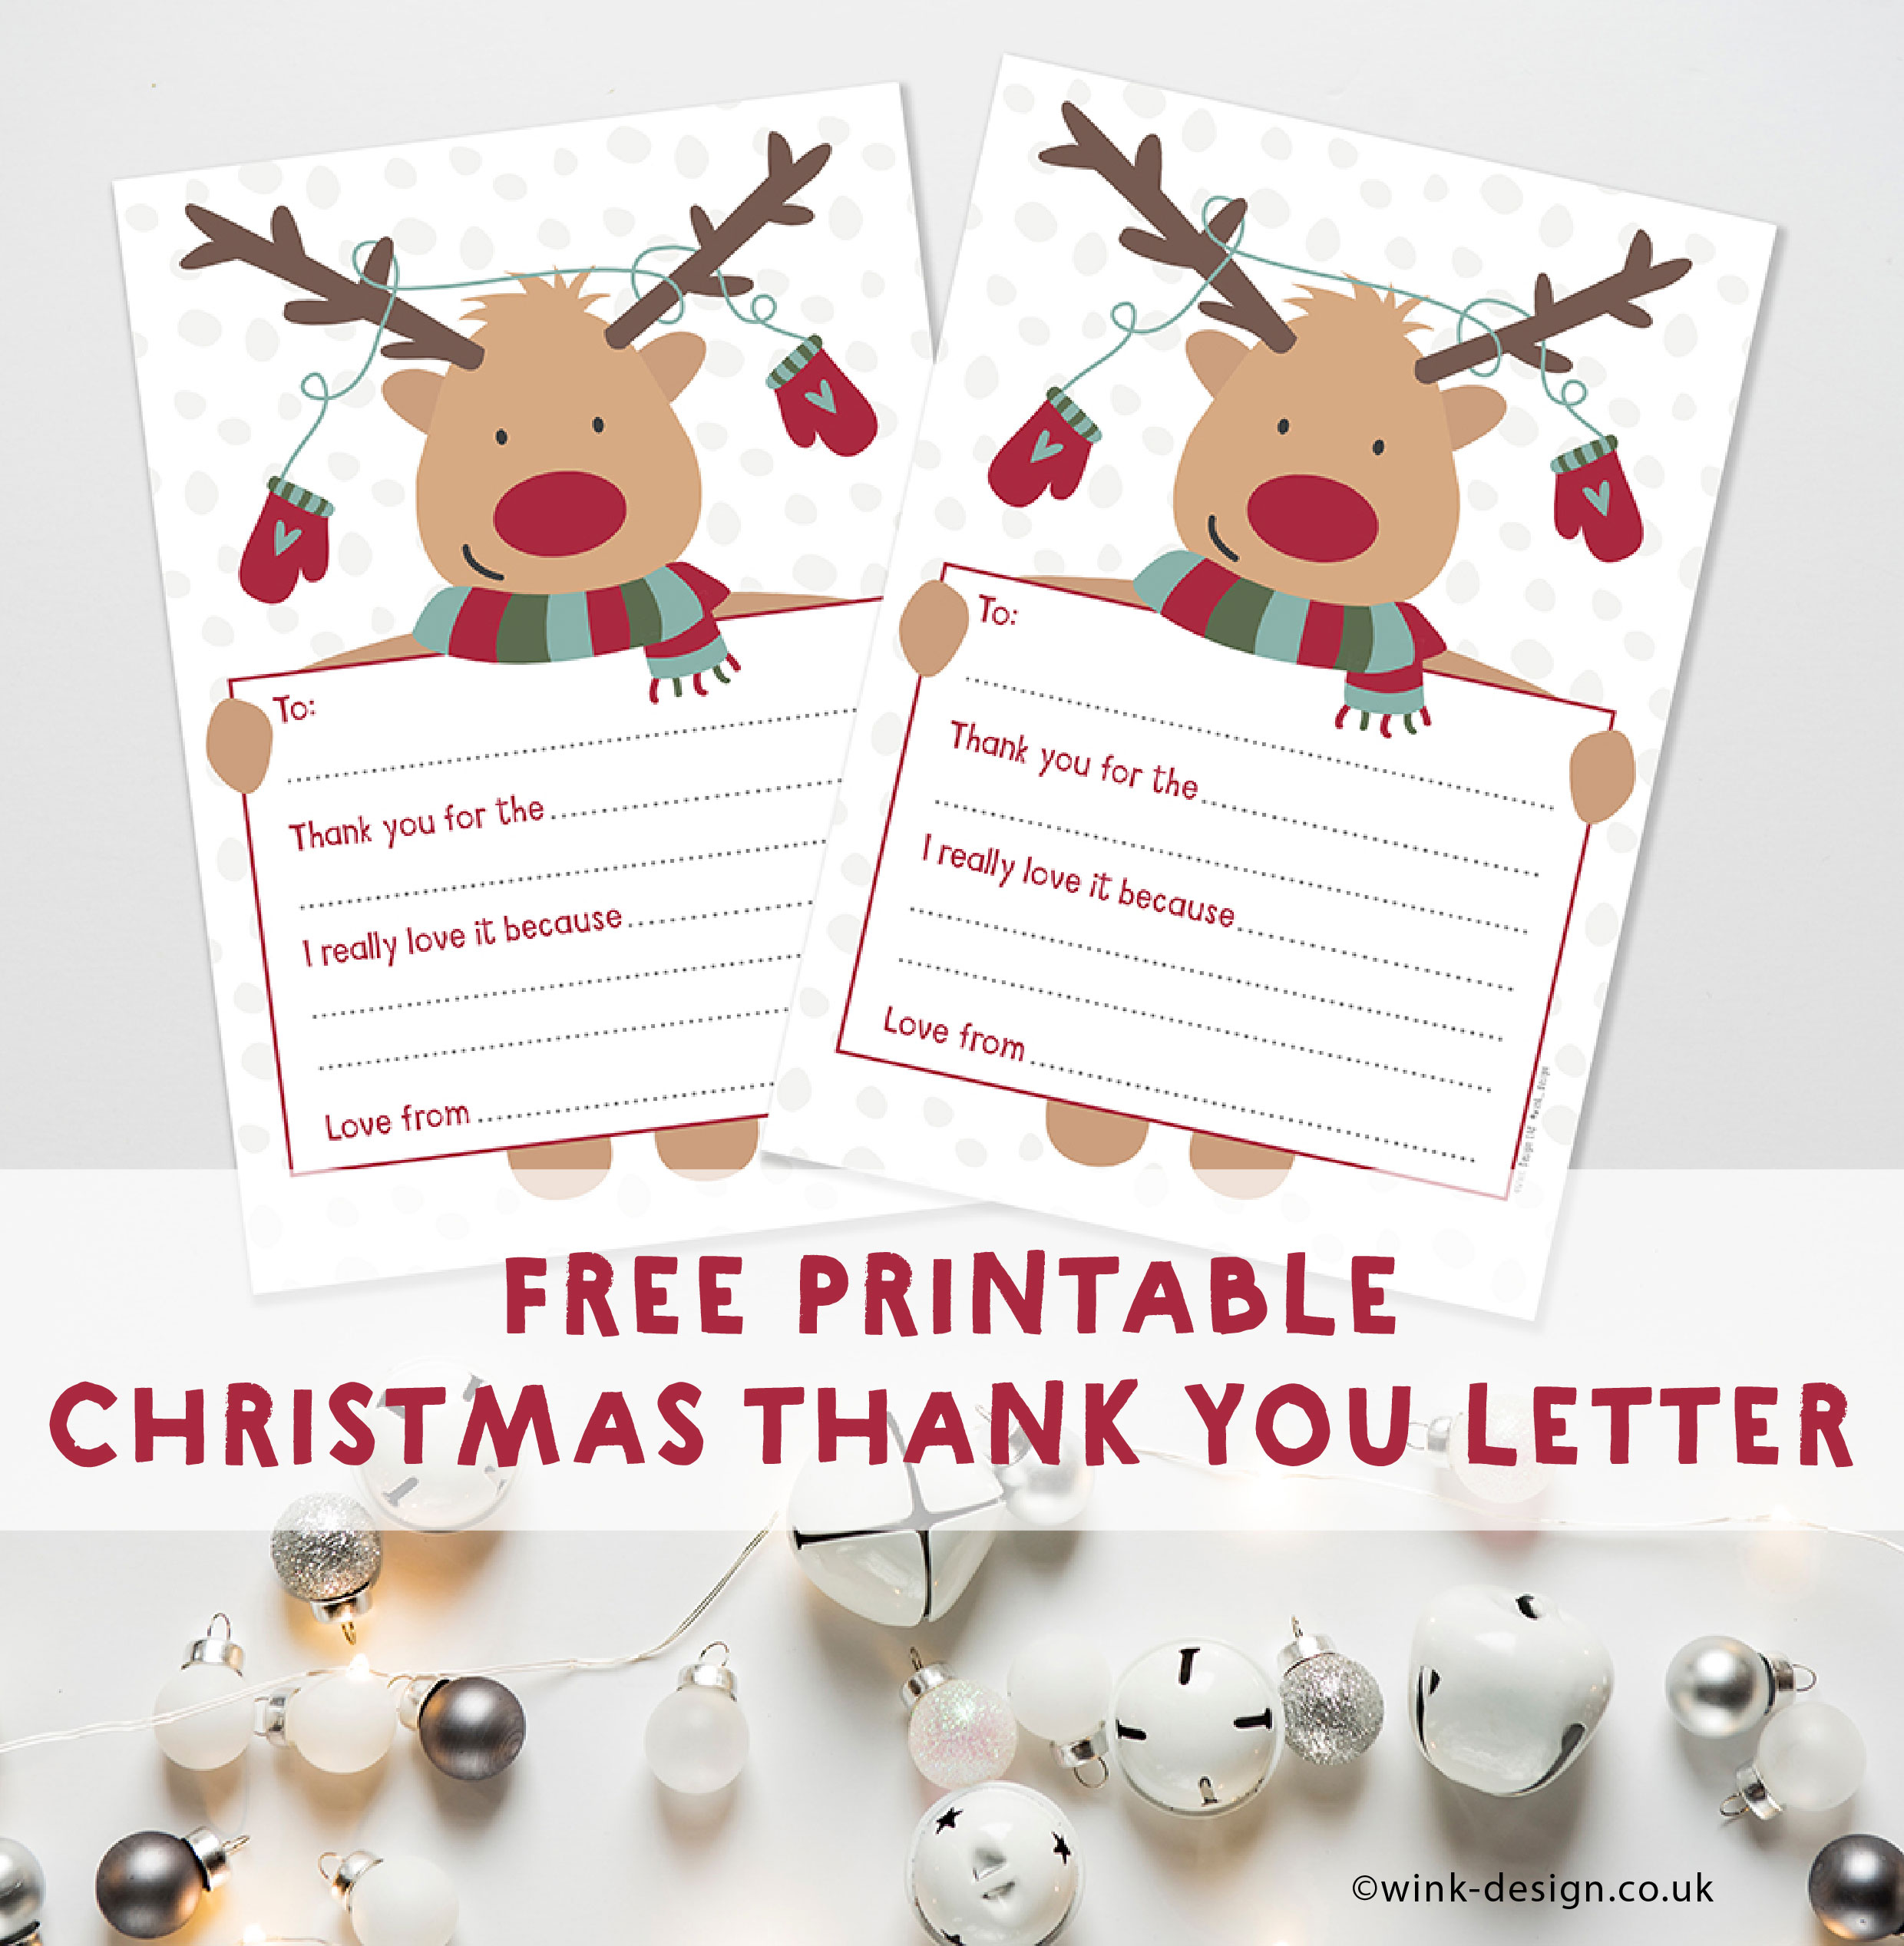 Free Printable Reindeer Thank You Letter by Wink Design 